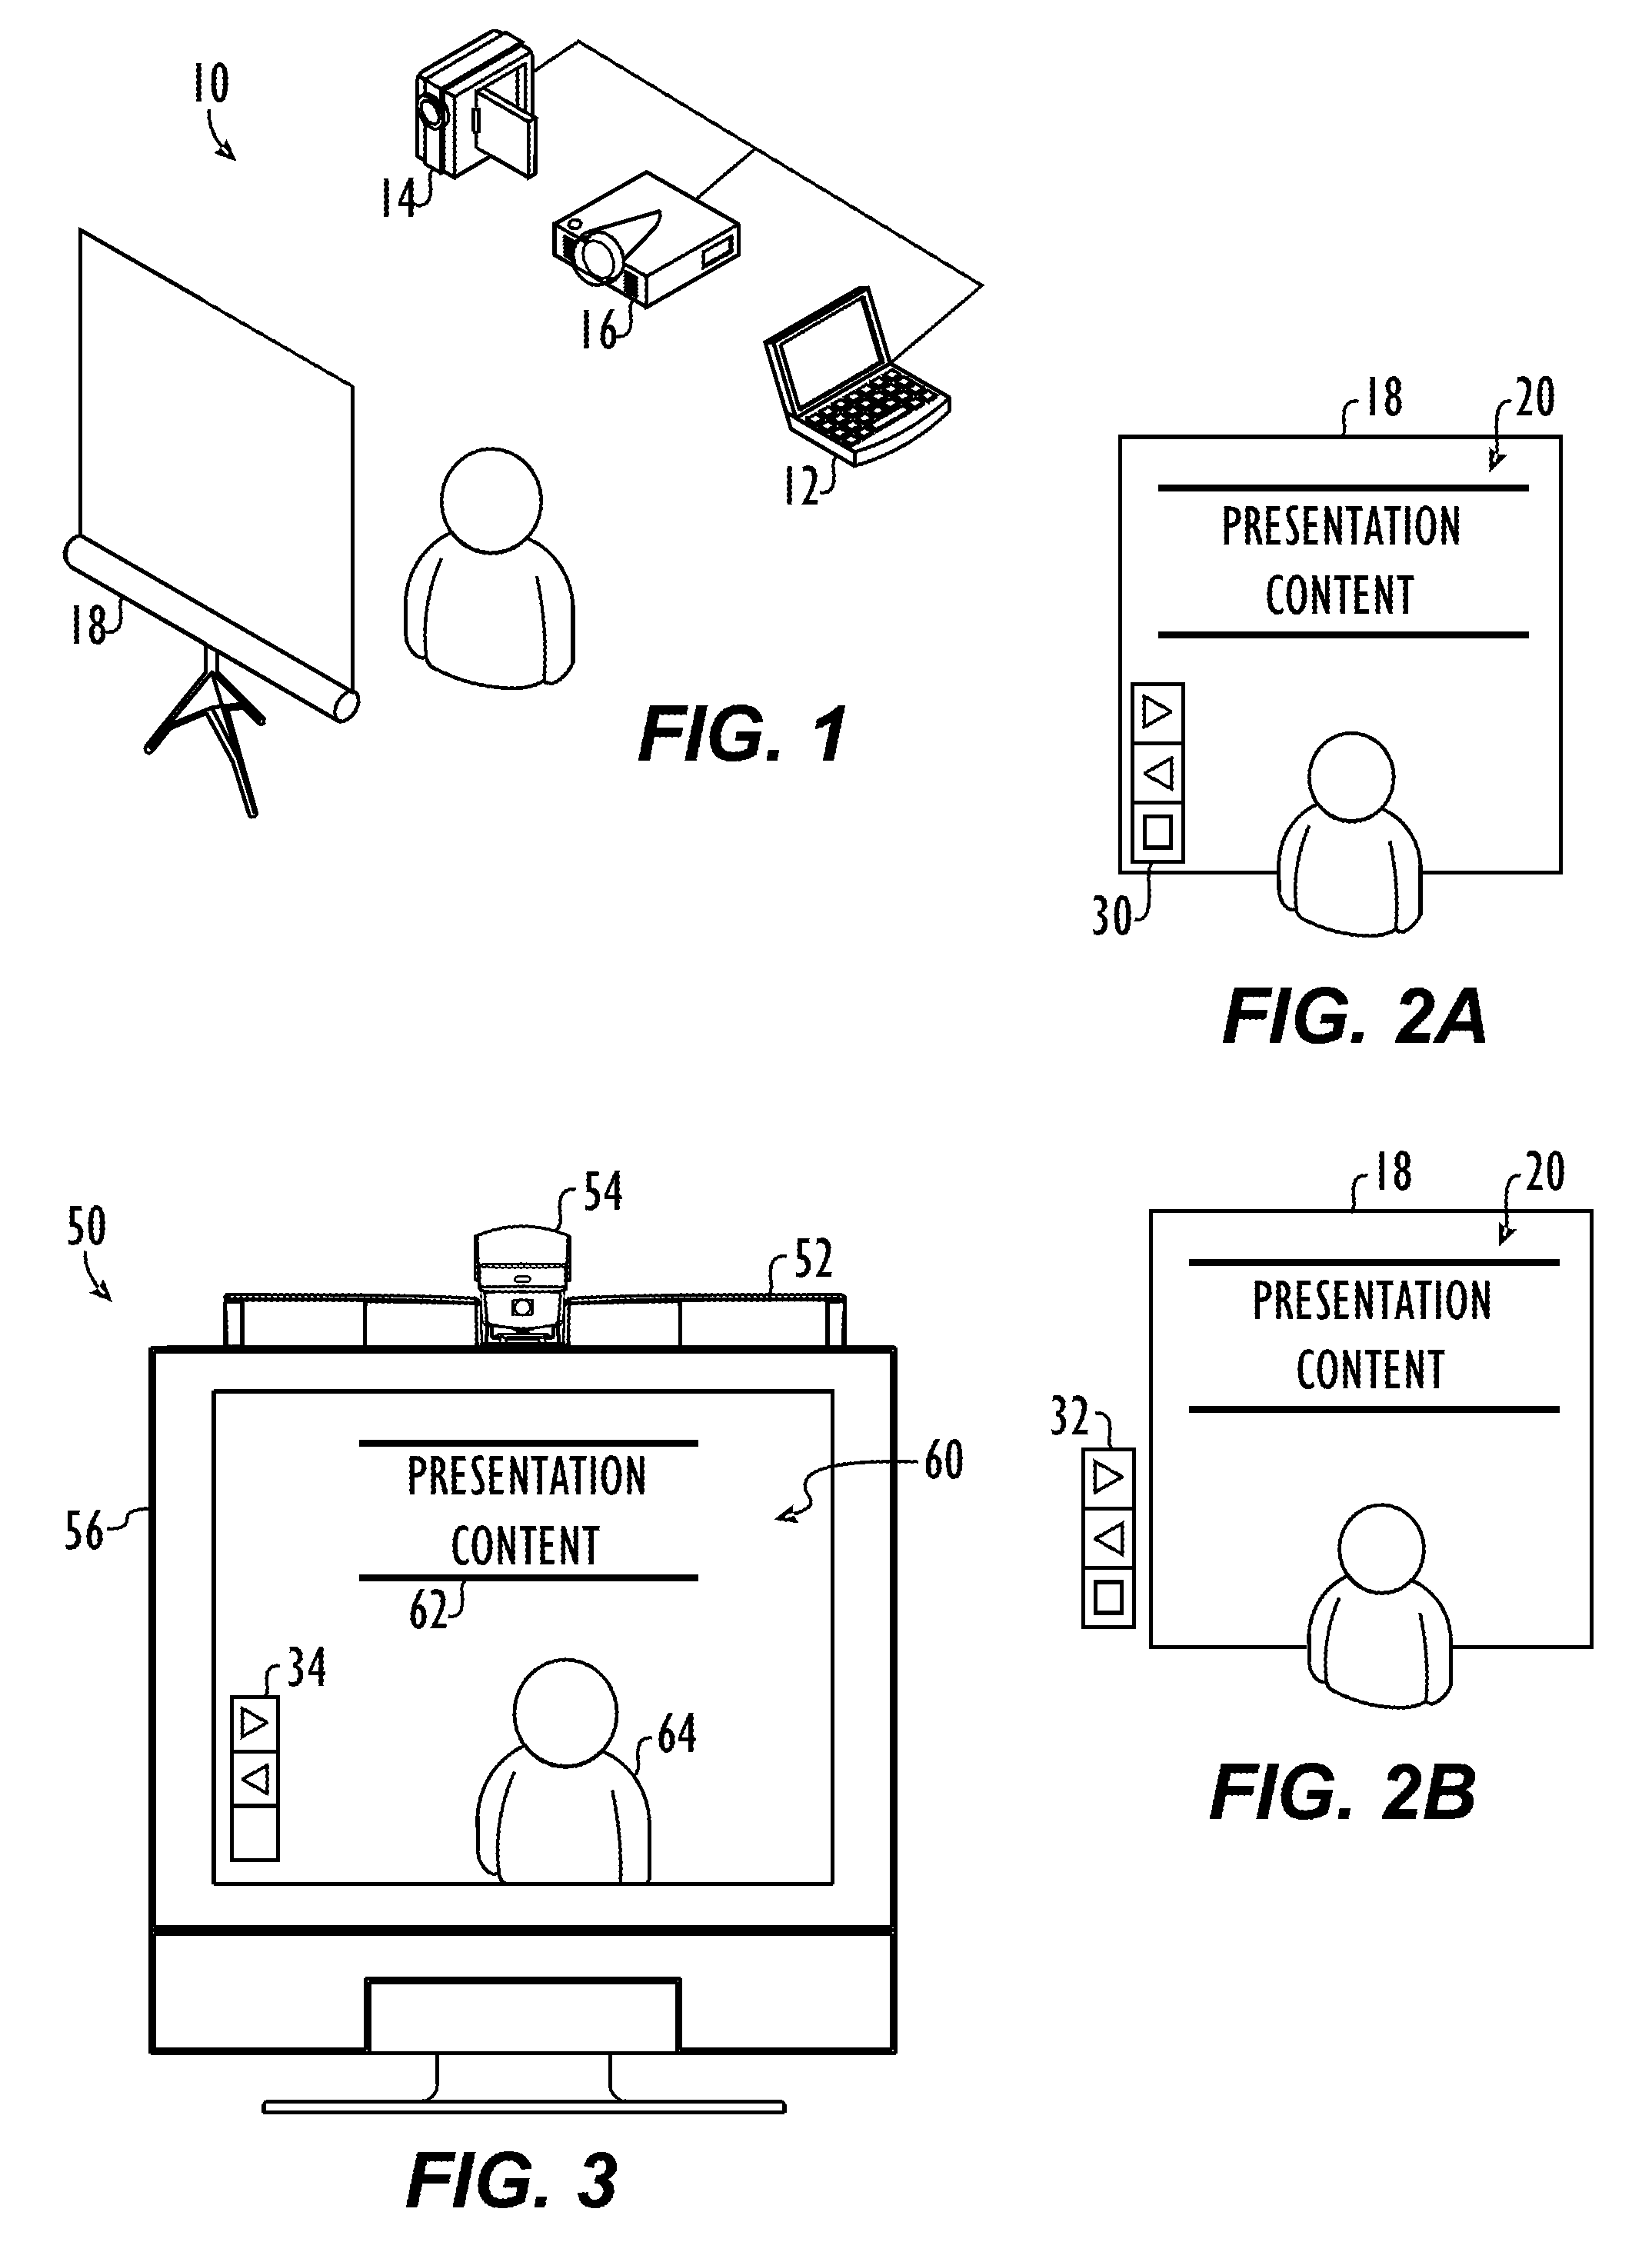 System and Method for Controlling Presentations and Videoconferences Using Hand Motions